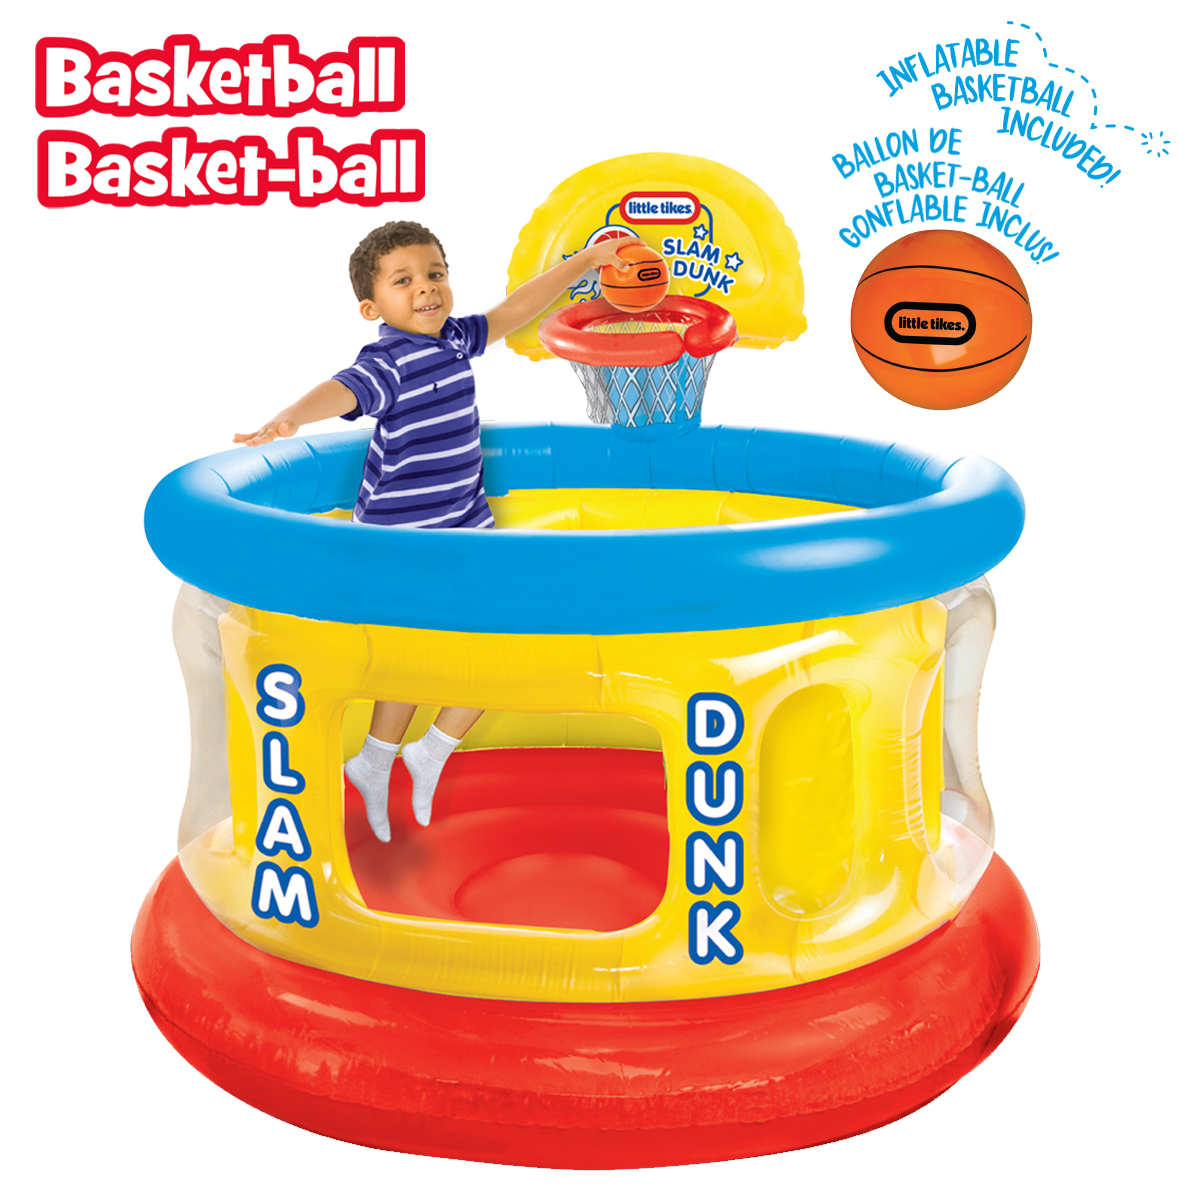 Little Tikes Slam Dunk Big Ball Pit, Inflatable Basketball Hoop and Balls for Kids Ages 3-6 - image 3 of 6